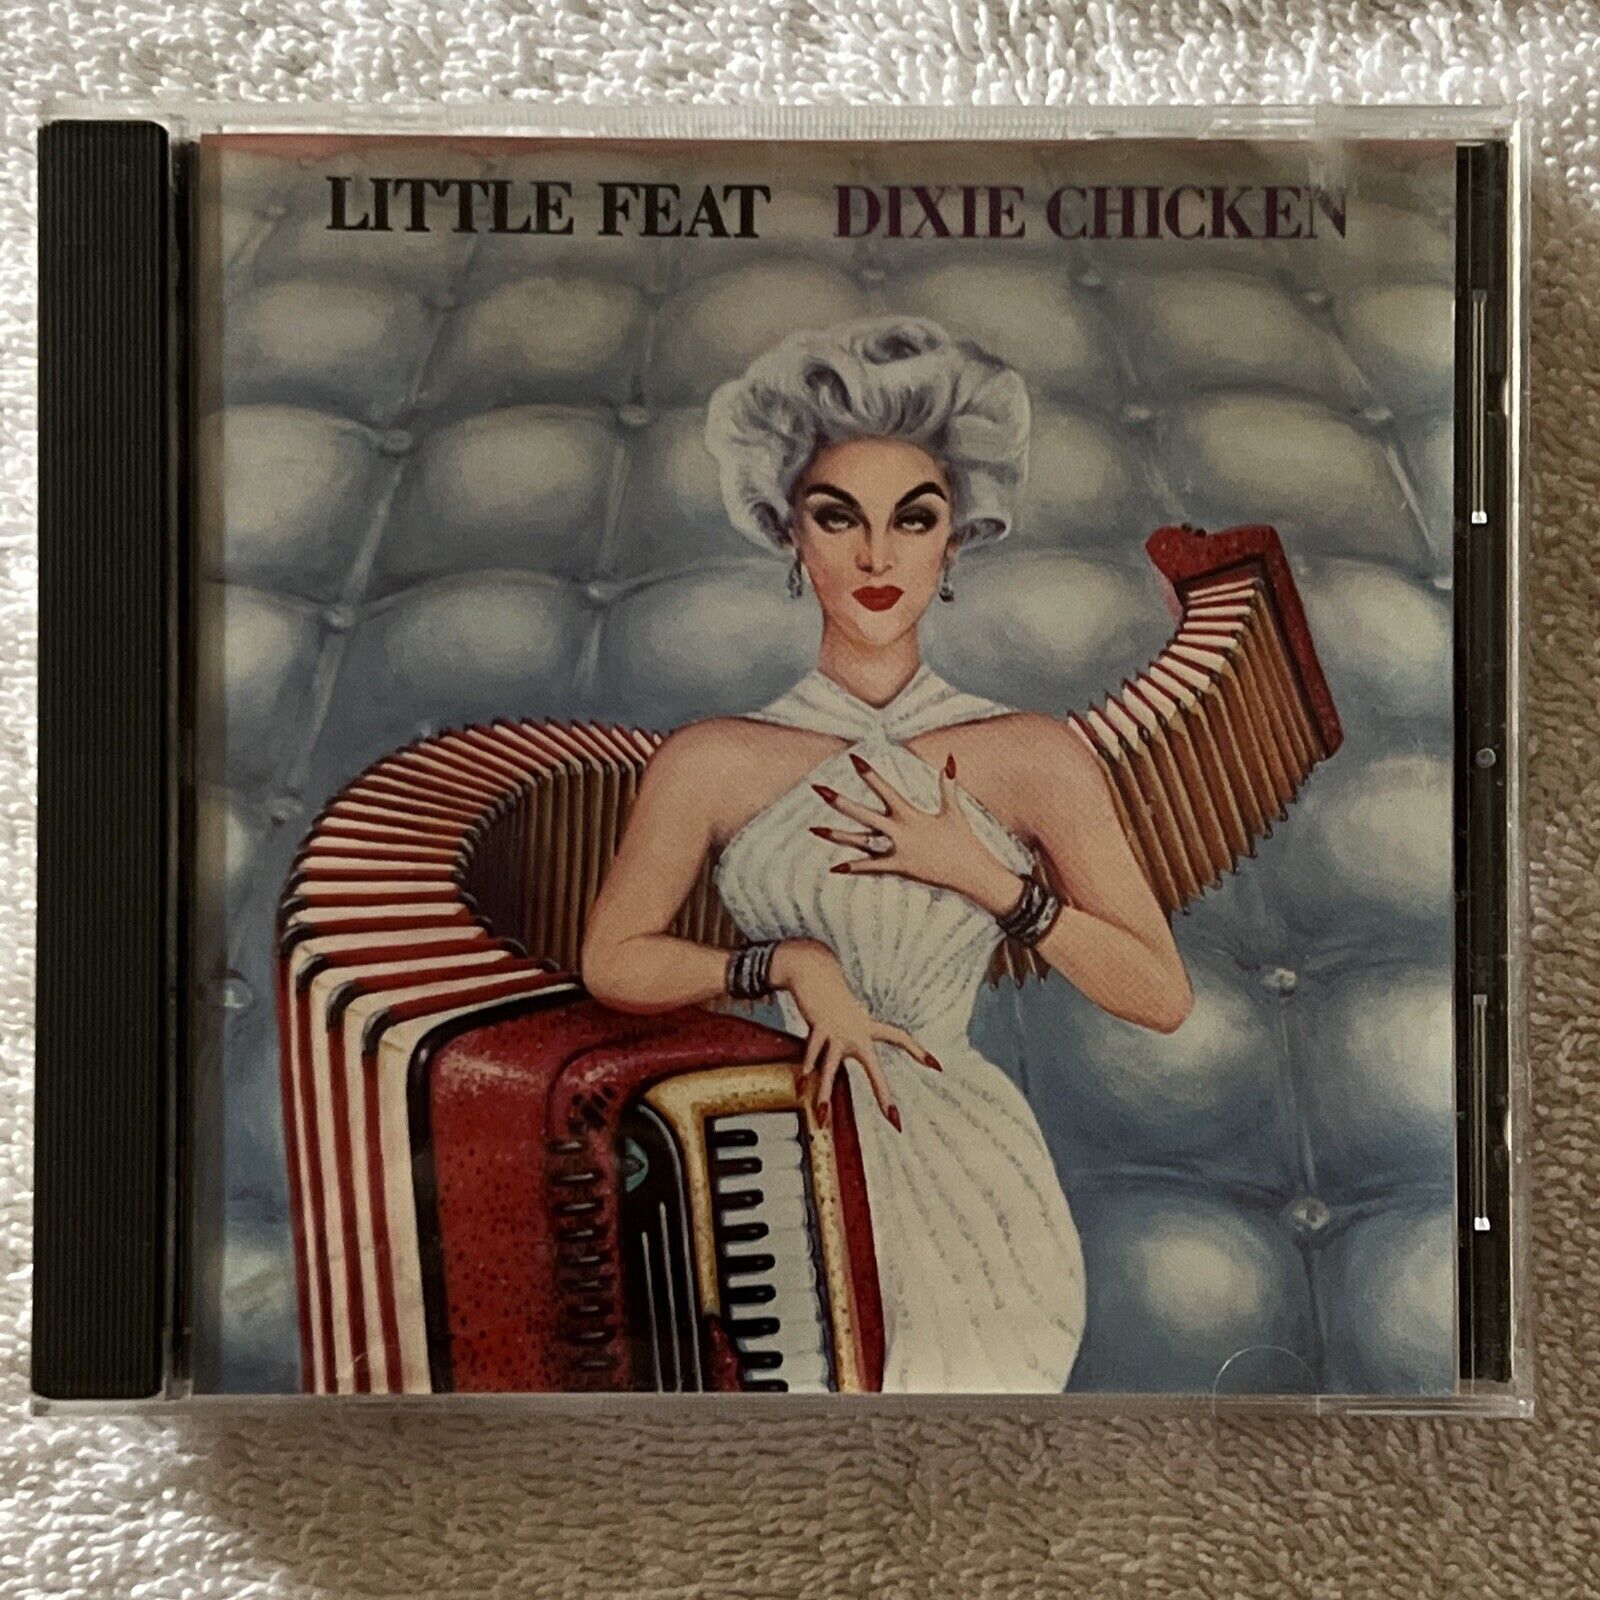 Dixie Chicken by Little Feat (CD, 1990)